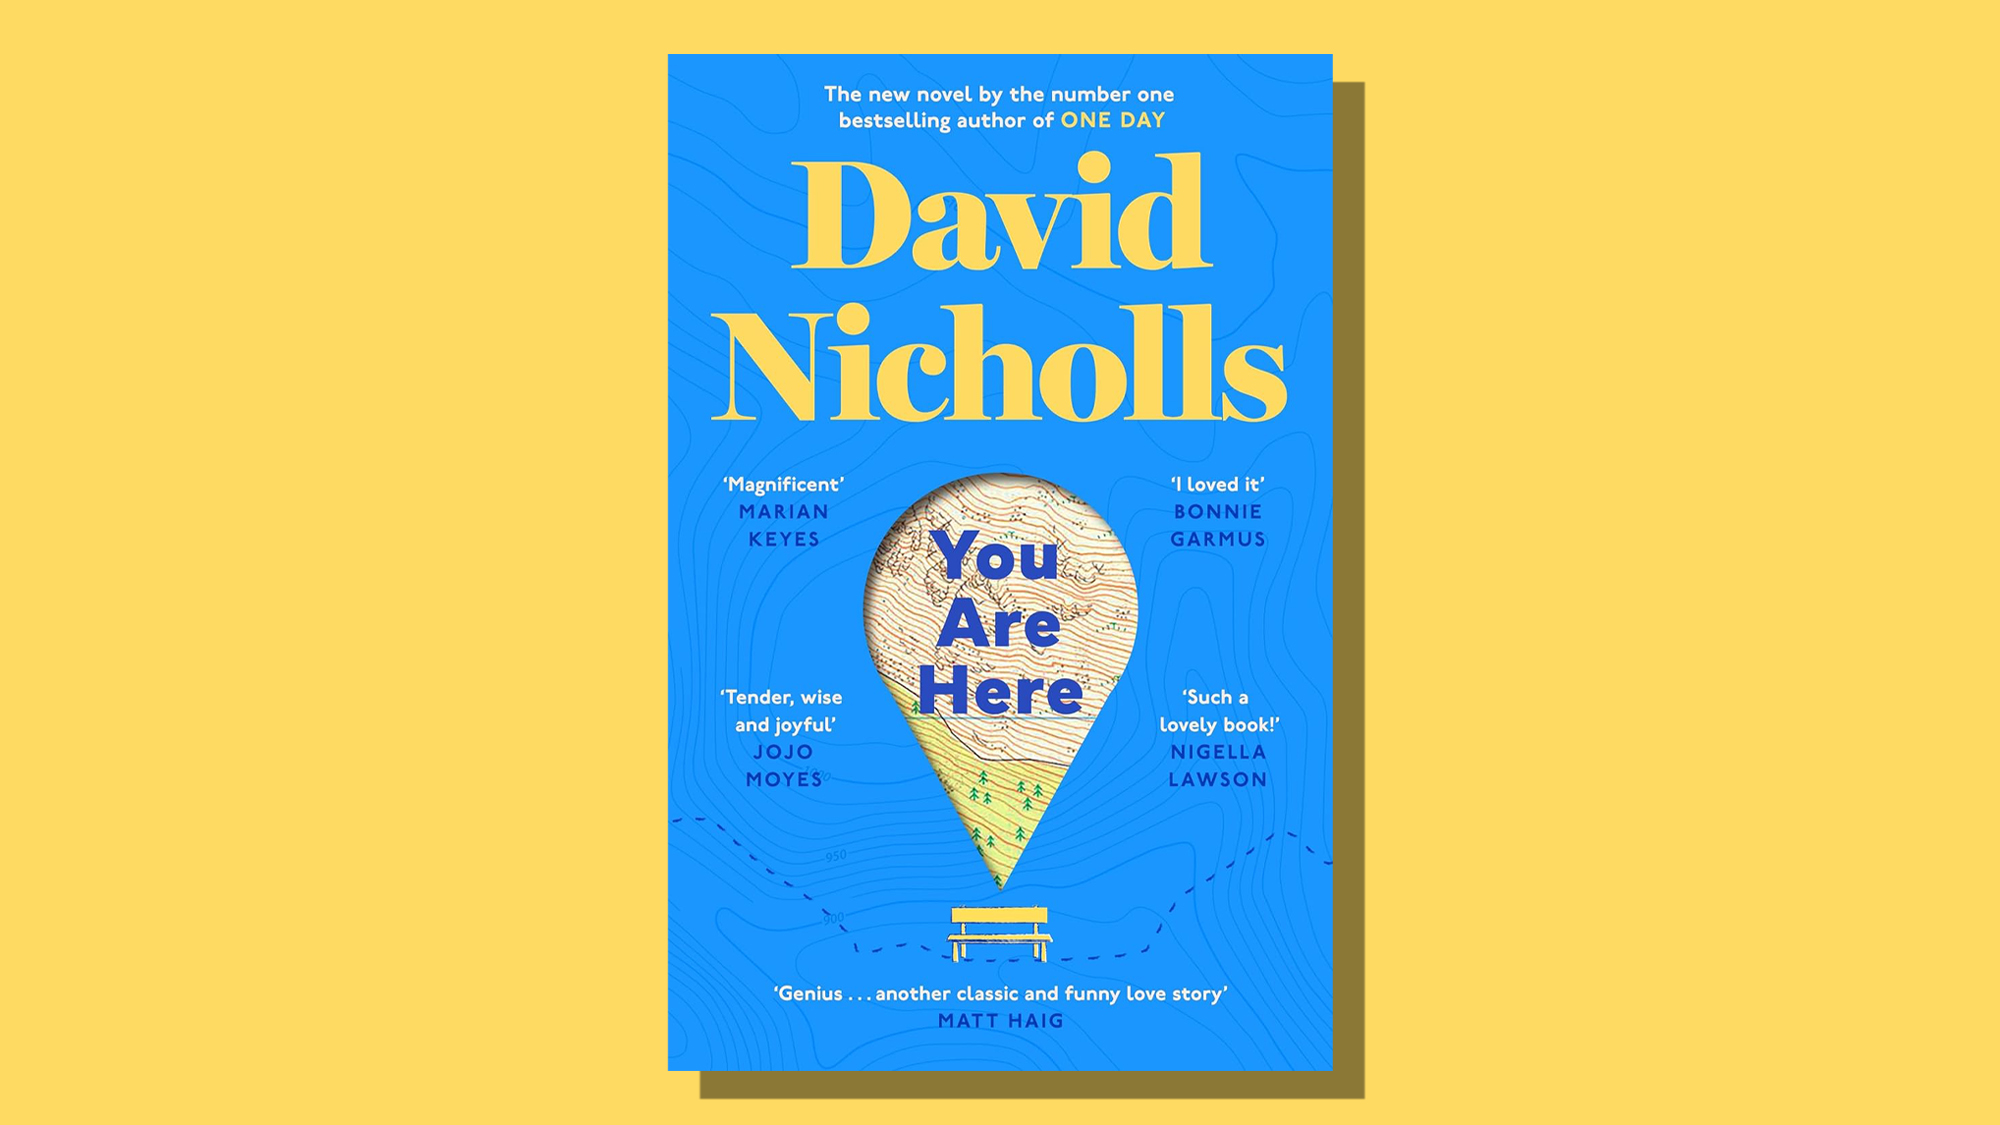  You Are Here: the new David Nicholls 'past-their-prime' romance 